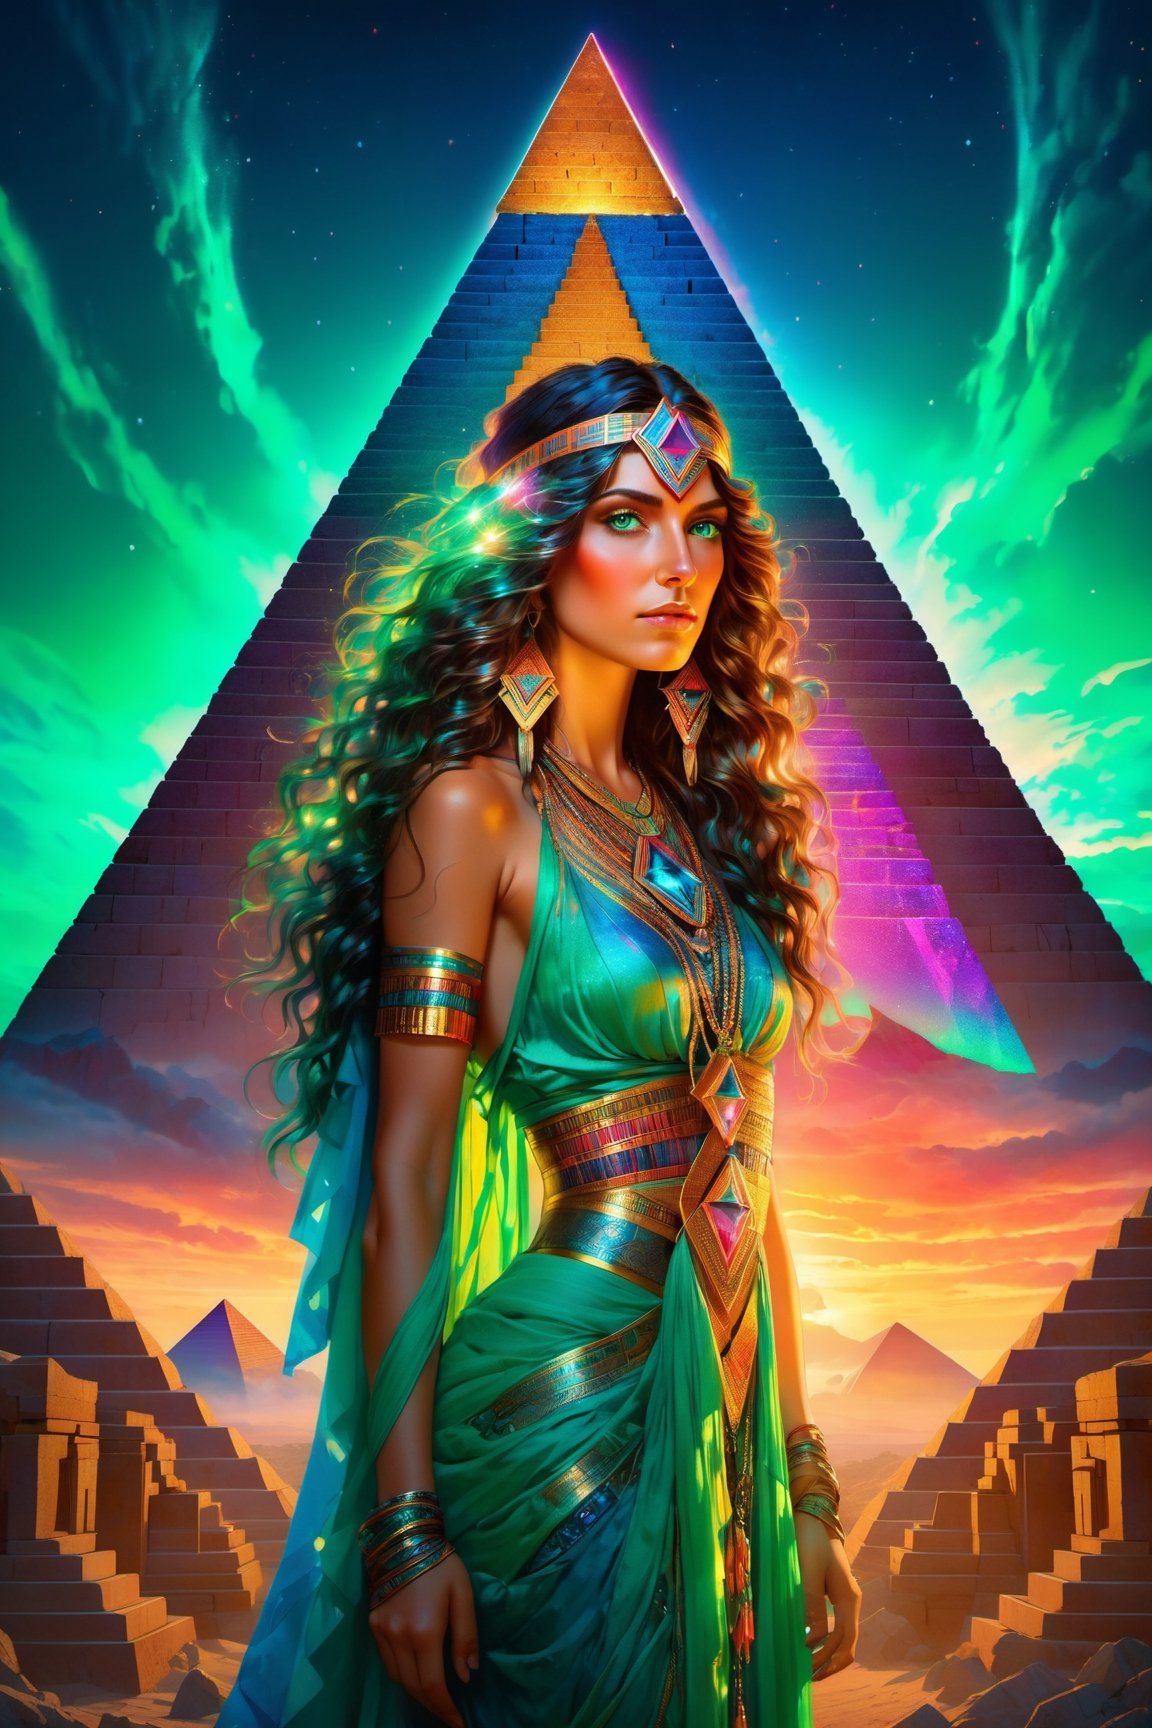 ((Girl)), 22 years old, is an Aztec warrior, full-length portrait of a beautiful woman, (in front of a pyramid: 1.5), free hands: 1.25, looking at the camera in front, intensely colored fantasy, long hair and dark curly, stunning realistic 1920s photography, green colored eyes, full body, natural background, cover art, hyper detailed painting, luminism, rendering octane, bar lighting, complex, high resolution concept art portrait 8k by Martina Fačková and Prywinko Arte, Artgerm, WLOP, Alphonse Mucha, Tony Taka, isometric details fractal bioluminescence, hyperrealistic stunning full color cover photo, hand drawn, bright, gritty, realistic, davinci, erte, 12k, intricate Definition suddenly, cinematic, rough sketch, mix of dark bold lines and loose lines, bold lines, on paper, real life human,